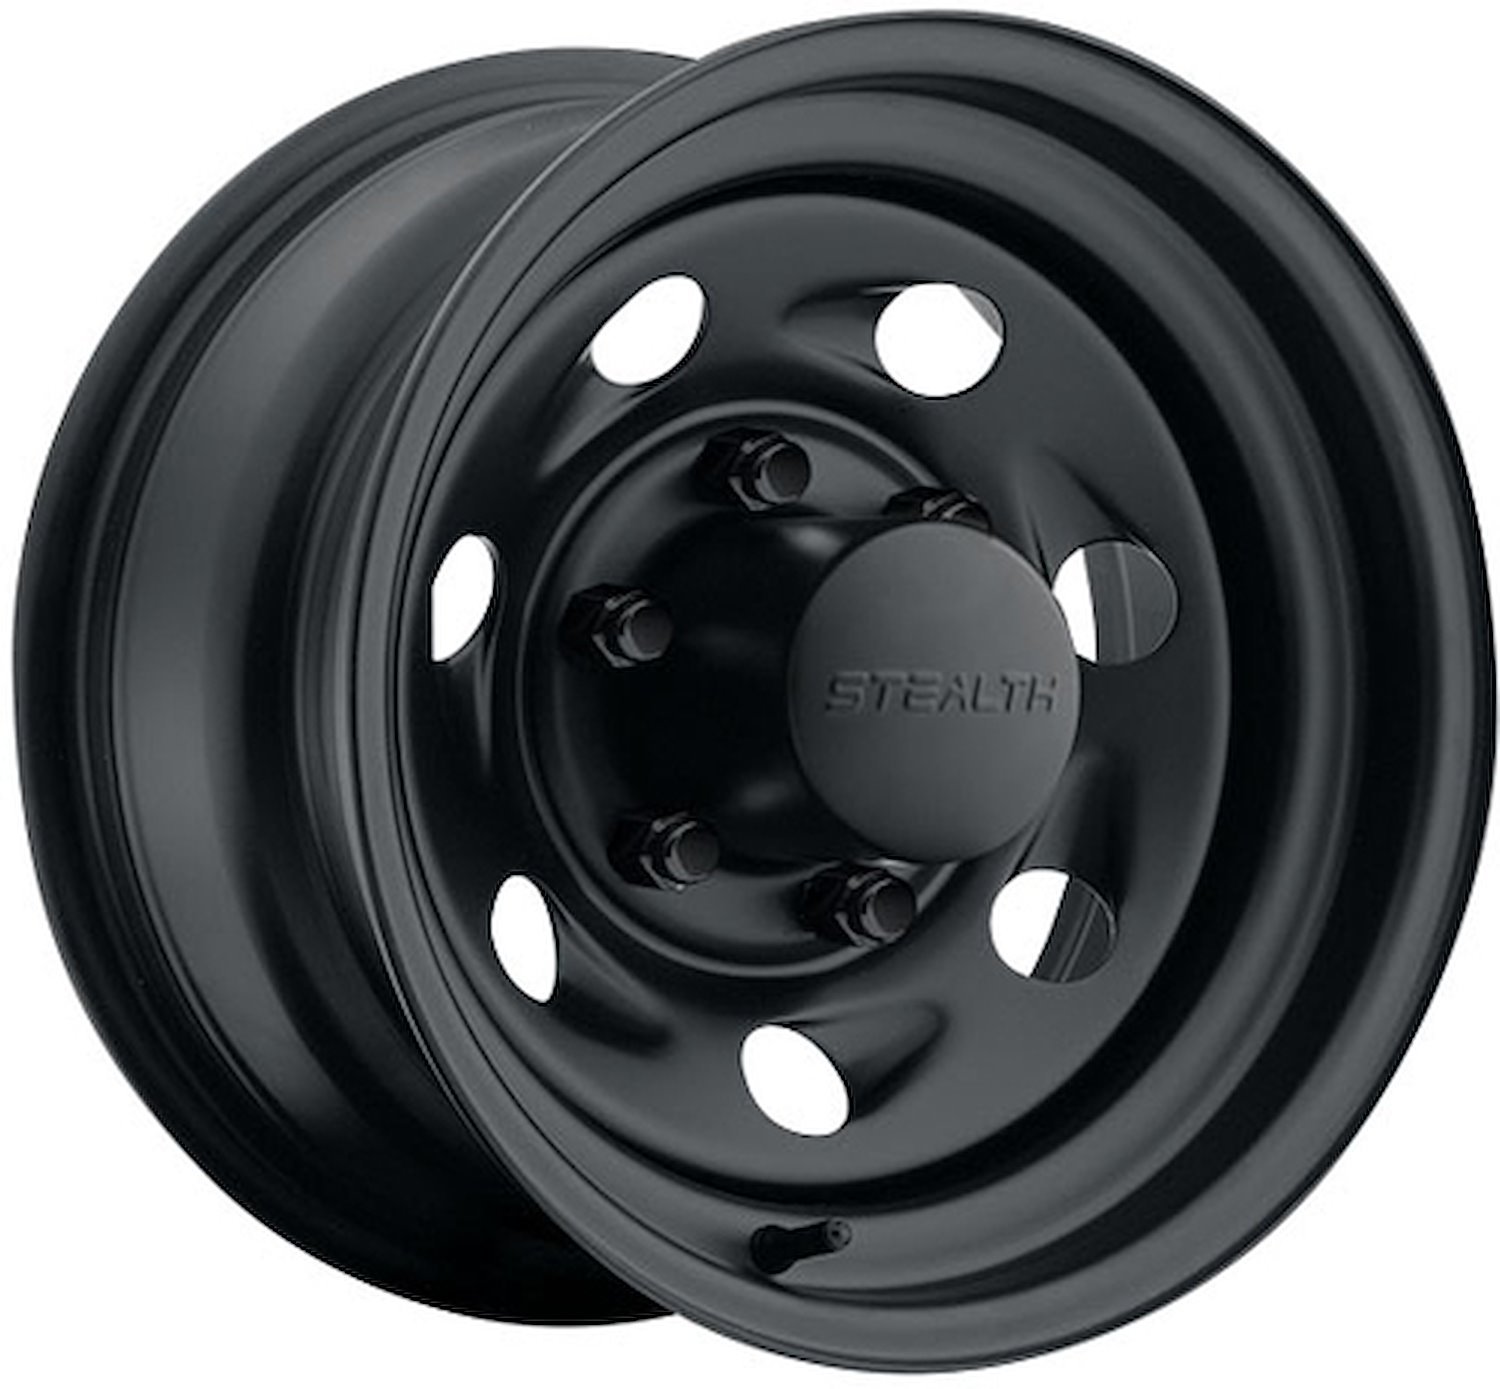 STEALTH BLACK VORTEC 15 x 10 6 x 55 Bolt Circle 4 Back Spacing 38 offset 428 Center Bore 1500 lbs Load Rating